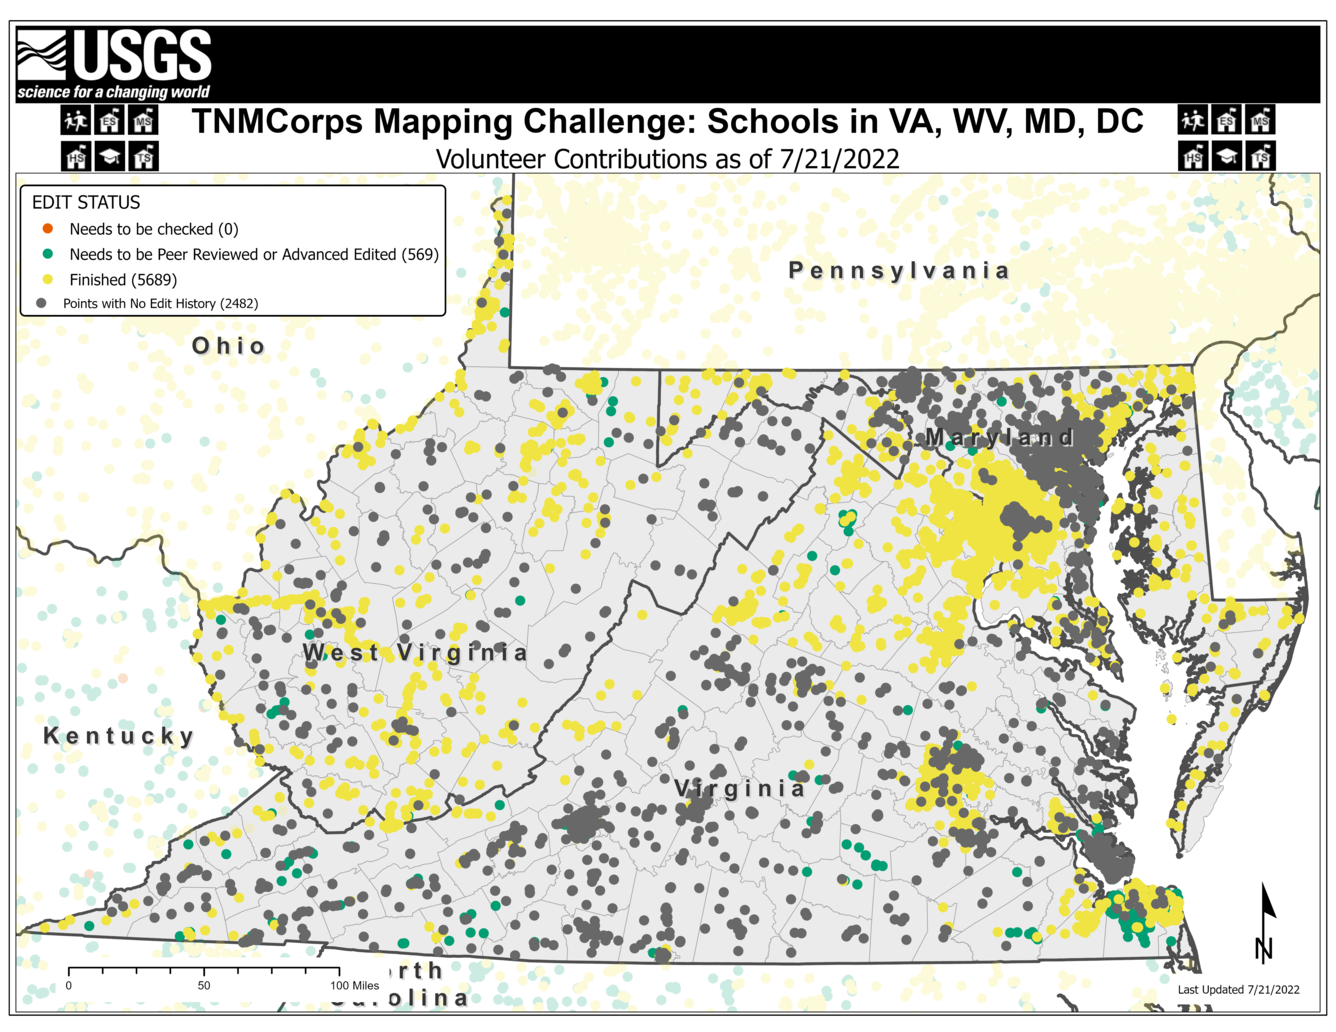 TNMCorps Mapping Challenge: Schools with No Edit History in Virginia, West Virginia, Maryland, and D.C.  (07/21/2022) 